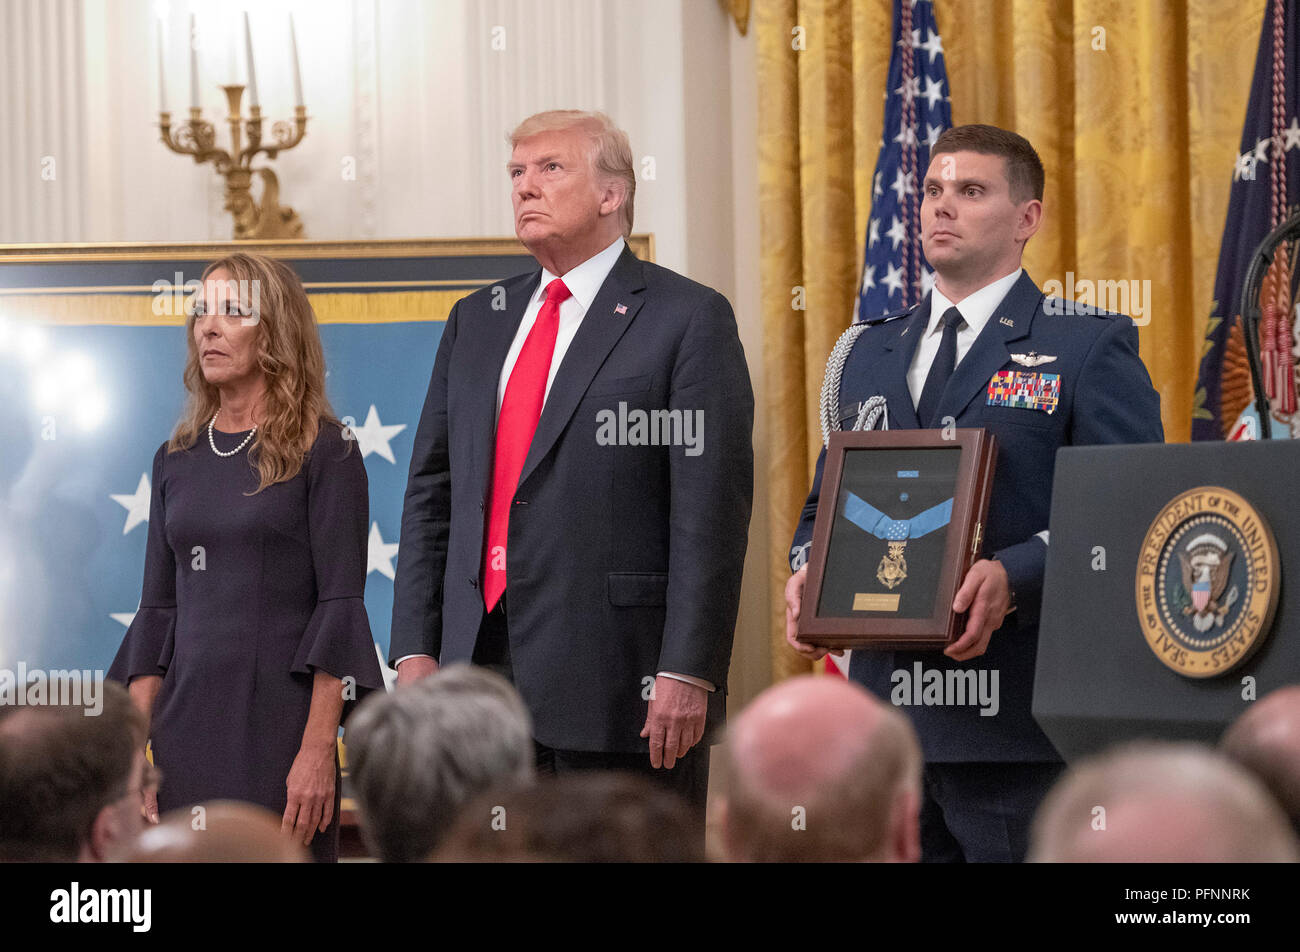 Valerie Nessel, widow of Technical Sergeant John A. Chapman, United States Air Force, left, stands with US President Donald J. Trump, center, makes remarks as she accepts the Medal of Honor posthumously from the President during a ceremony in the East Room of the White House in Washington, DC on Wednesday, August 22, 2018. Sergeant Chapman is being honored for his actions on March 4, 2002, on Takur Ghar mountain in Afghanistan where he gave his life to save his teammates. Credit: Ron Sachs/CNP | usage worldwide Stock Photo